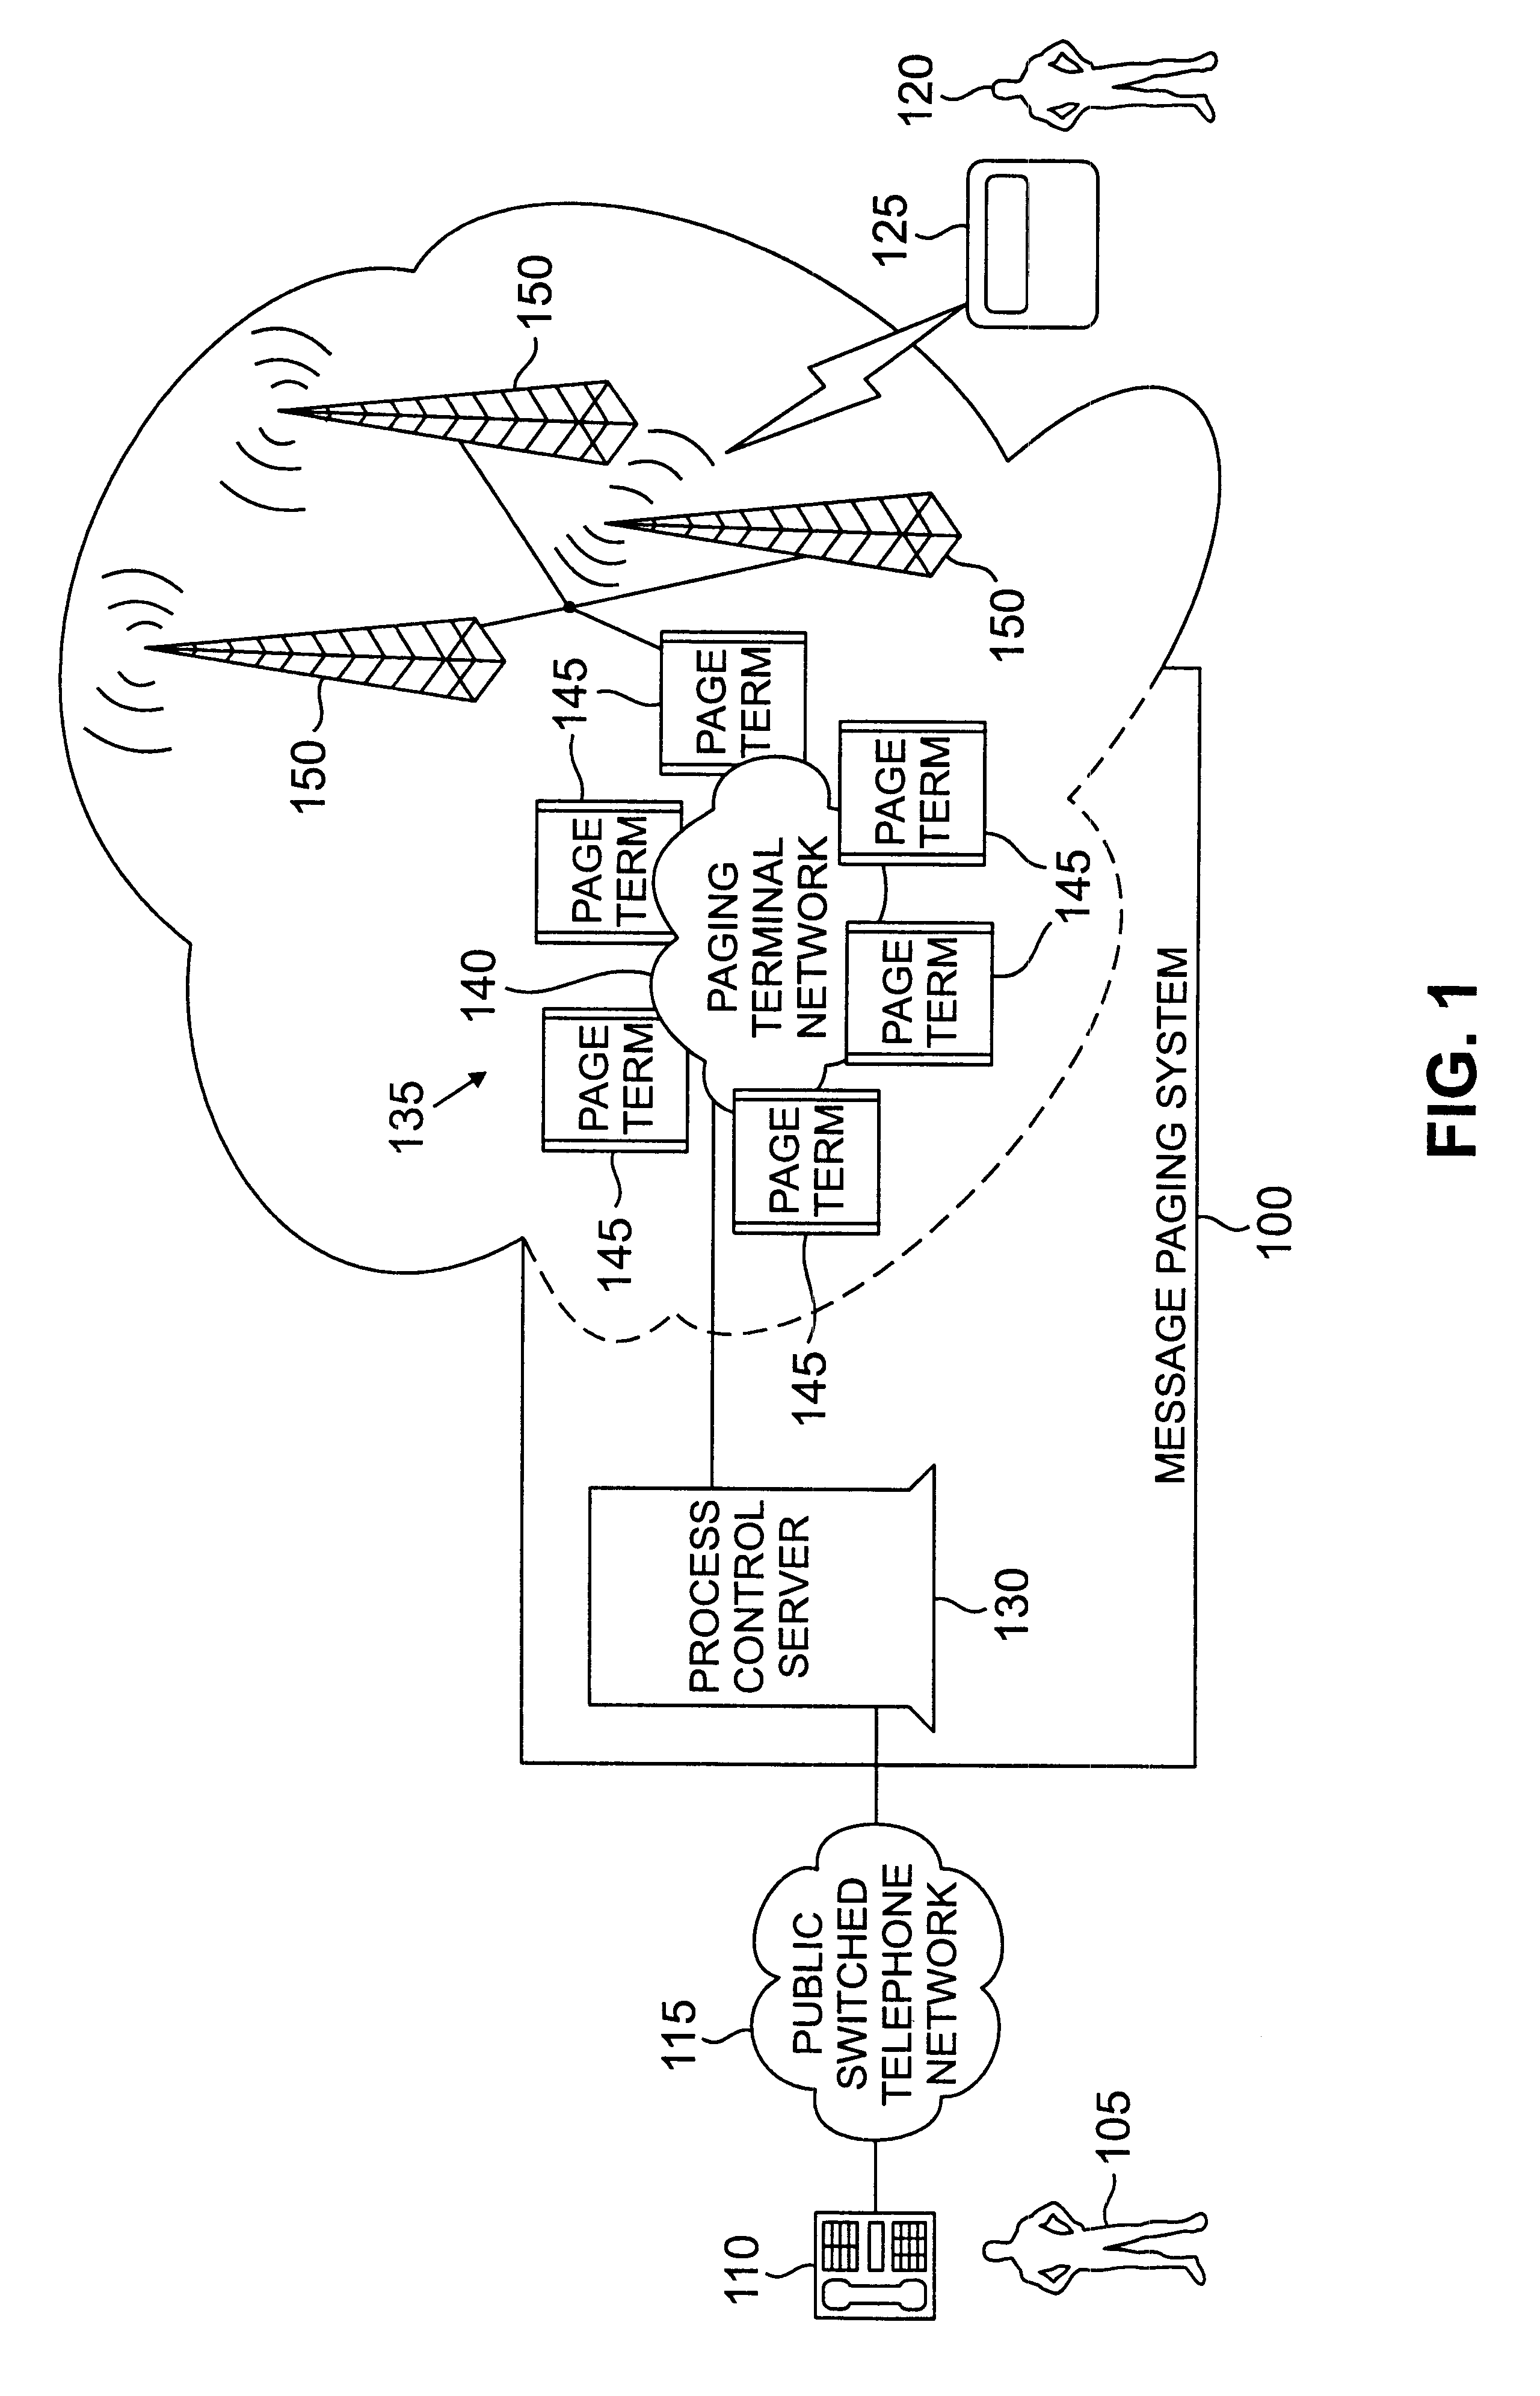 Controller for use with communications systems for converting a voice message to a text message